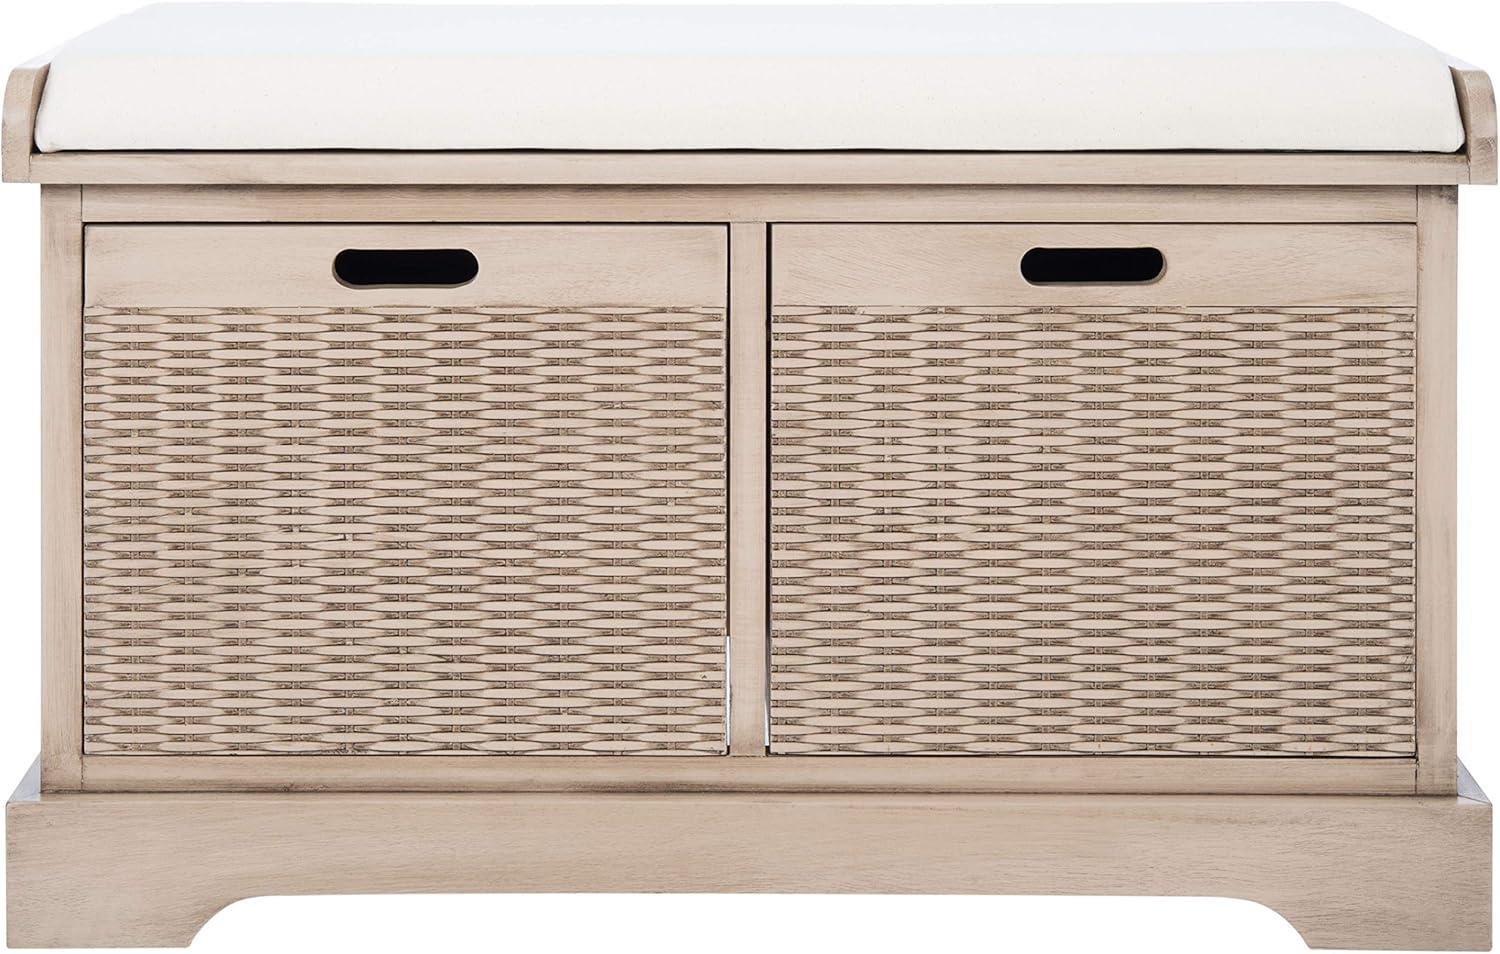 Landers Sand Cushioned Storage Bench with Dual Basket Drawers